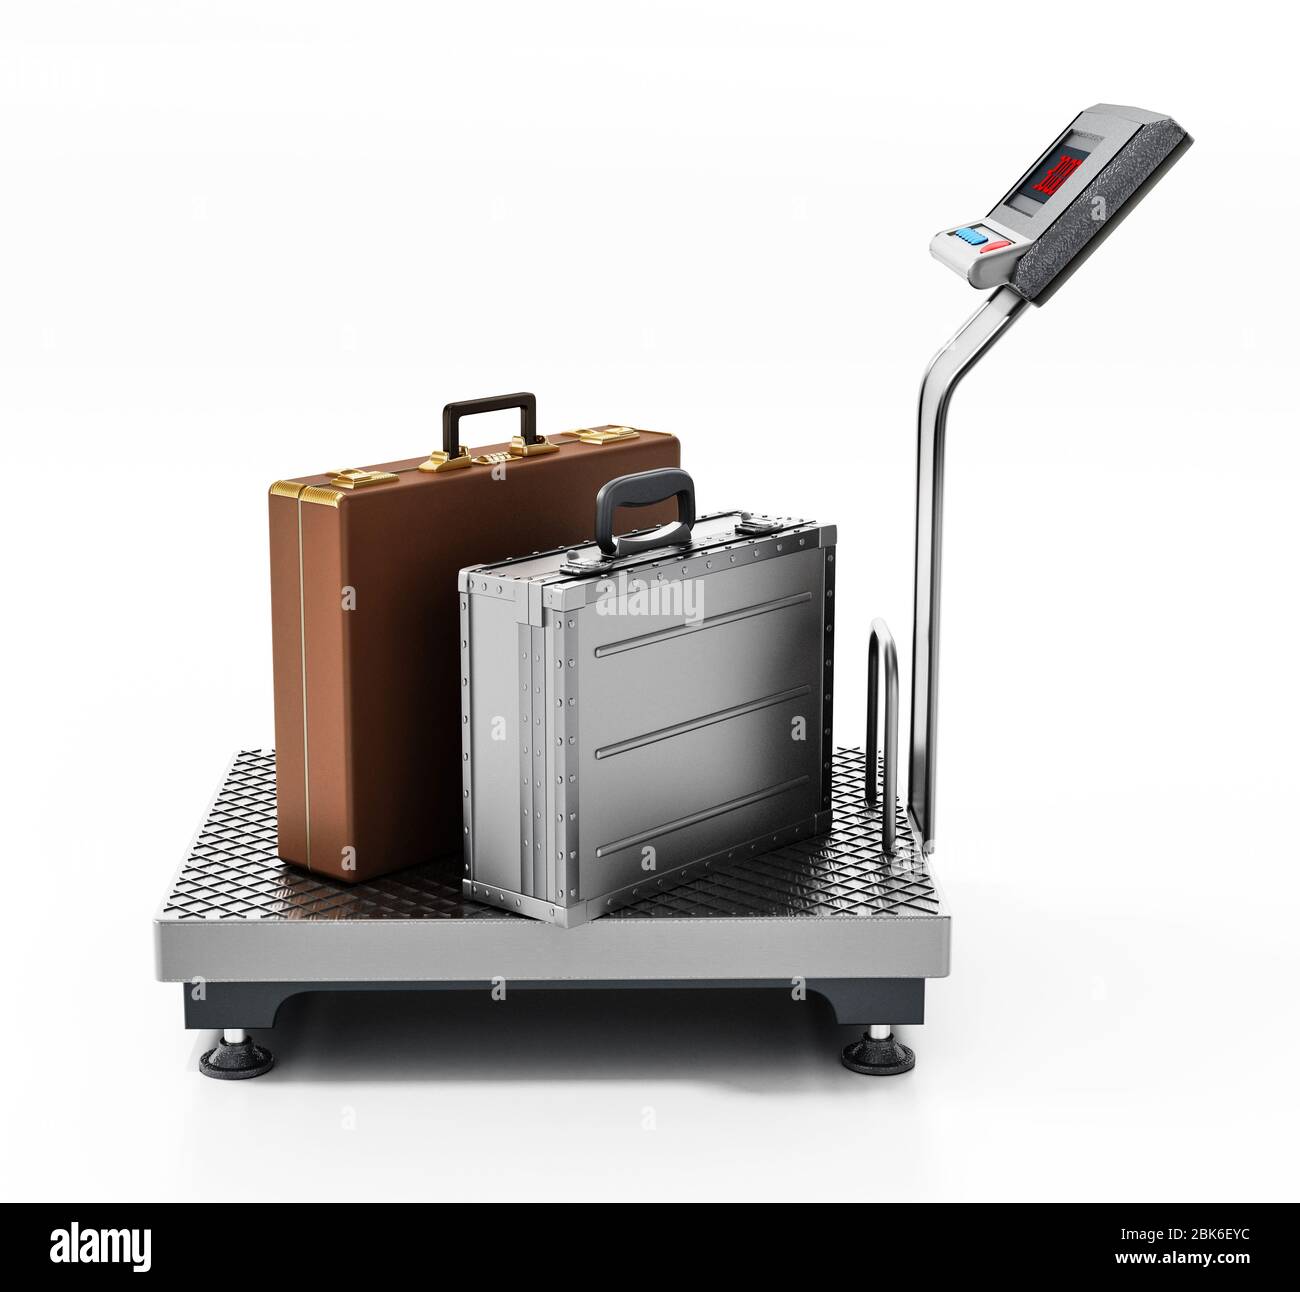 https://c8.alamy.com/comp/2BK6EYC/industrial-scale-with-suitcases-isolated-on-white-background-3d-illustration-2BK6EYC.jpg